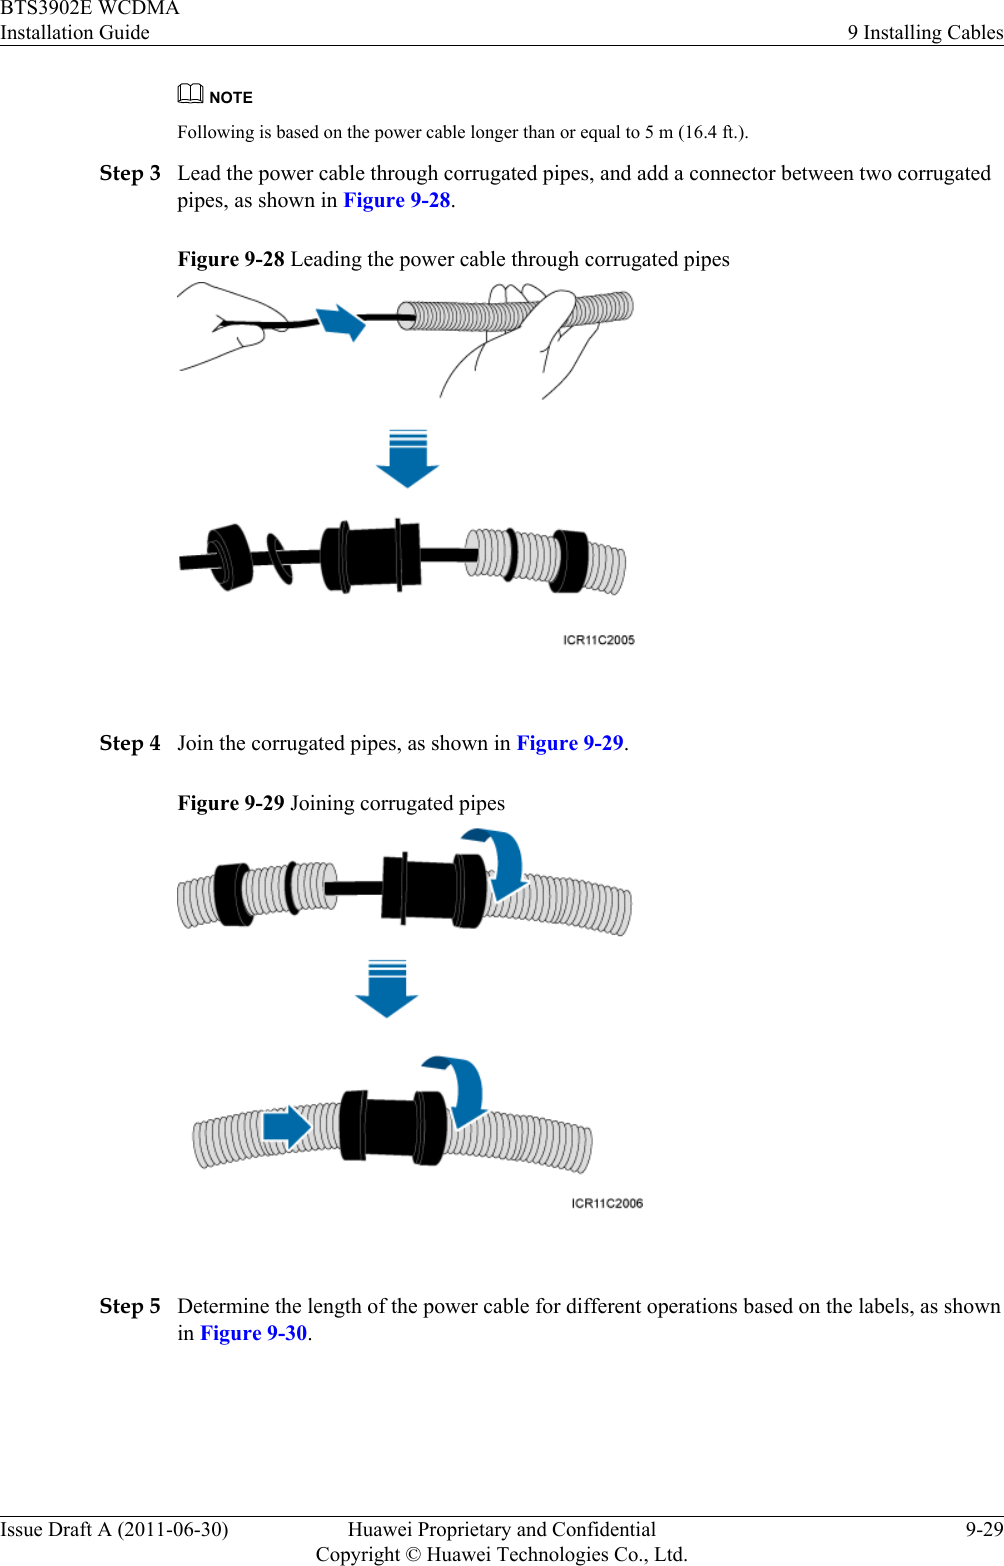 NOTEFollowing is based on the power cable longer than or equal to 5 m (16.4 ft.).Step 3 Lead the power cable through corrugated pipes, and add a connector between two corrugatedpipes, as shown in Figure 9-28.Figure 9-28 Leading the power cable through corrugated pipes Step 4 Join the corrugated pipes, as shown in Figure 9-29.Figure 9-29 Joining corrugated pipes Step 5 Determine the length of the power cable for different operations based on the labels, as shownin Figure 9-30.BTS3902E WCDMAInstallation Guide 9 Installing CablesIssue Draft A (2011-06-30) Huawei Proprietary and ConfidentialCopyright © Huawei Technologies Co., Ltd.9-29